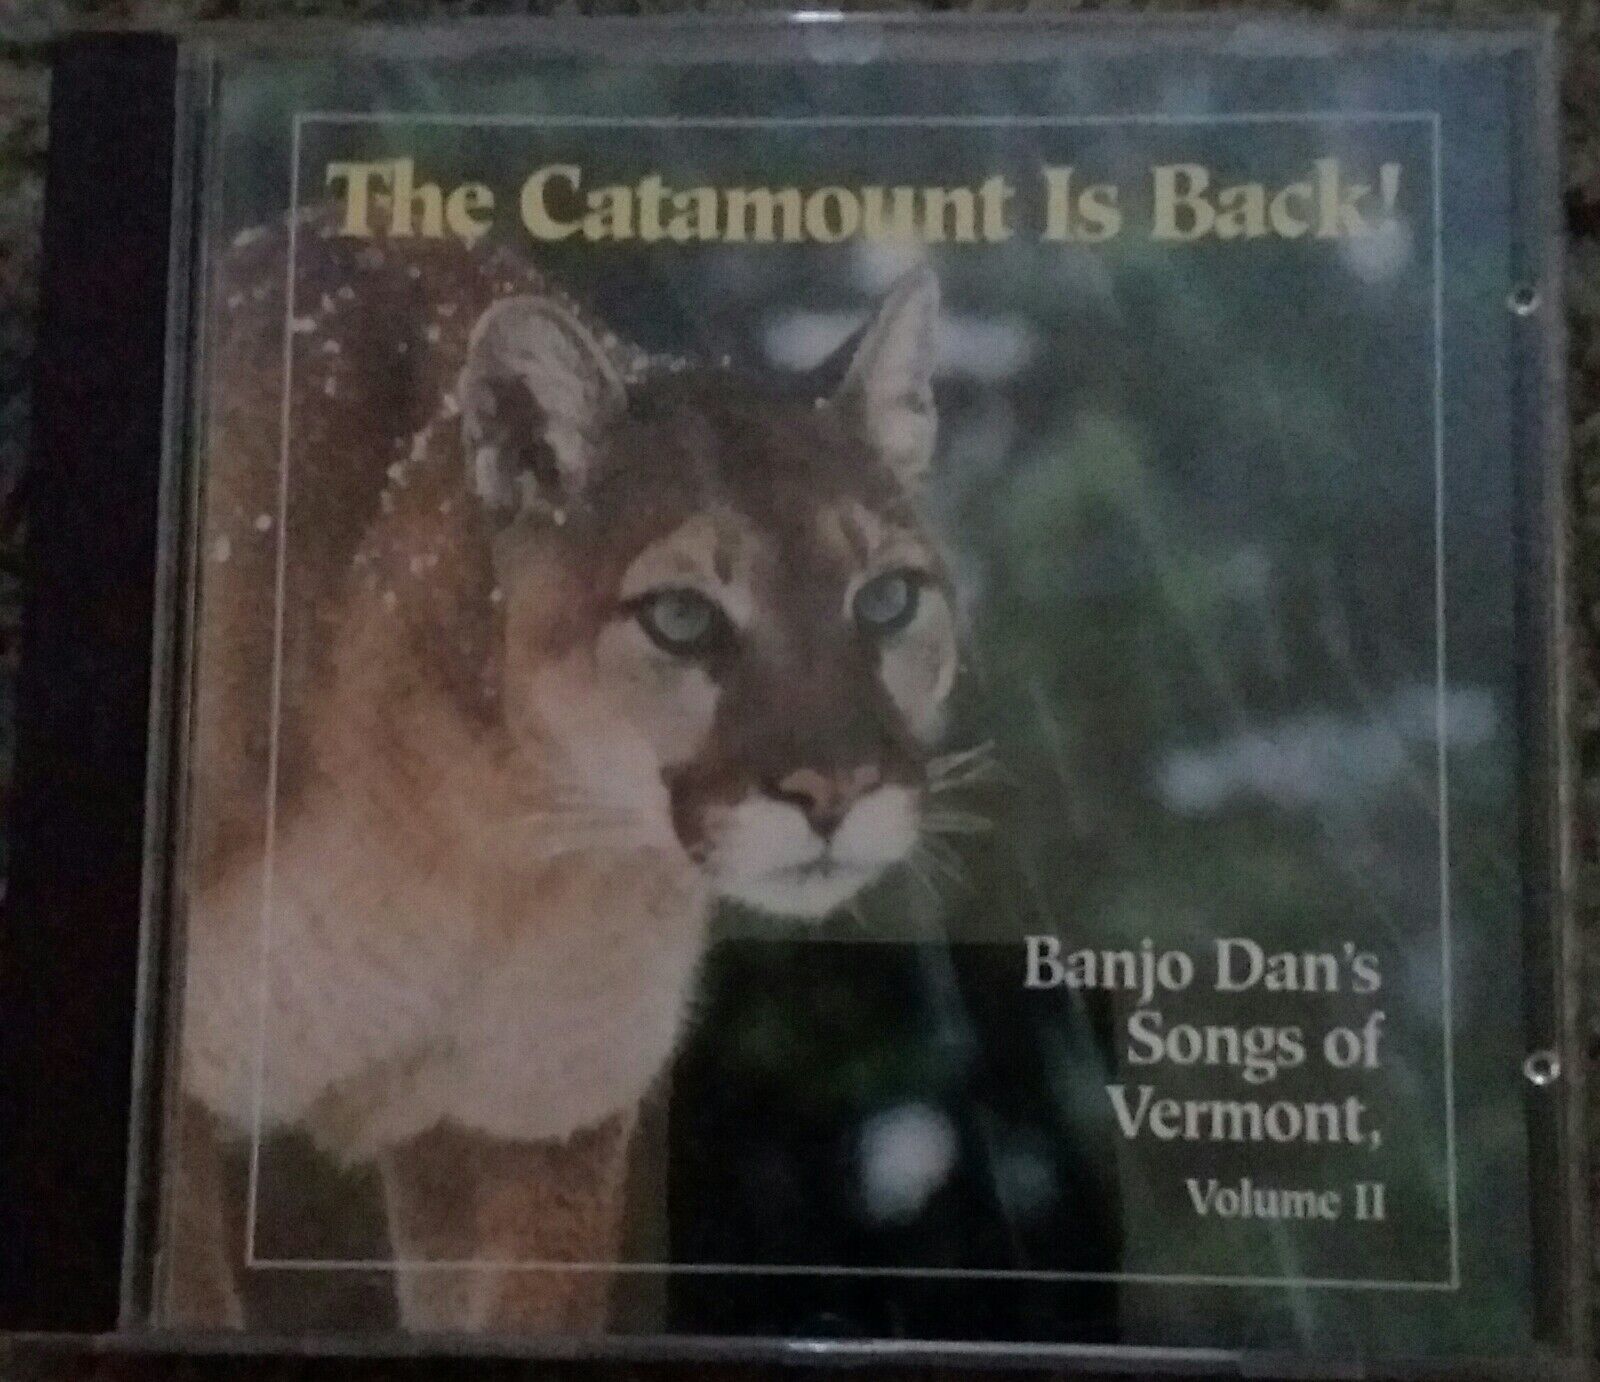 The Catamount Is Back Banjo Dan's Songs Of Vermont CD